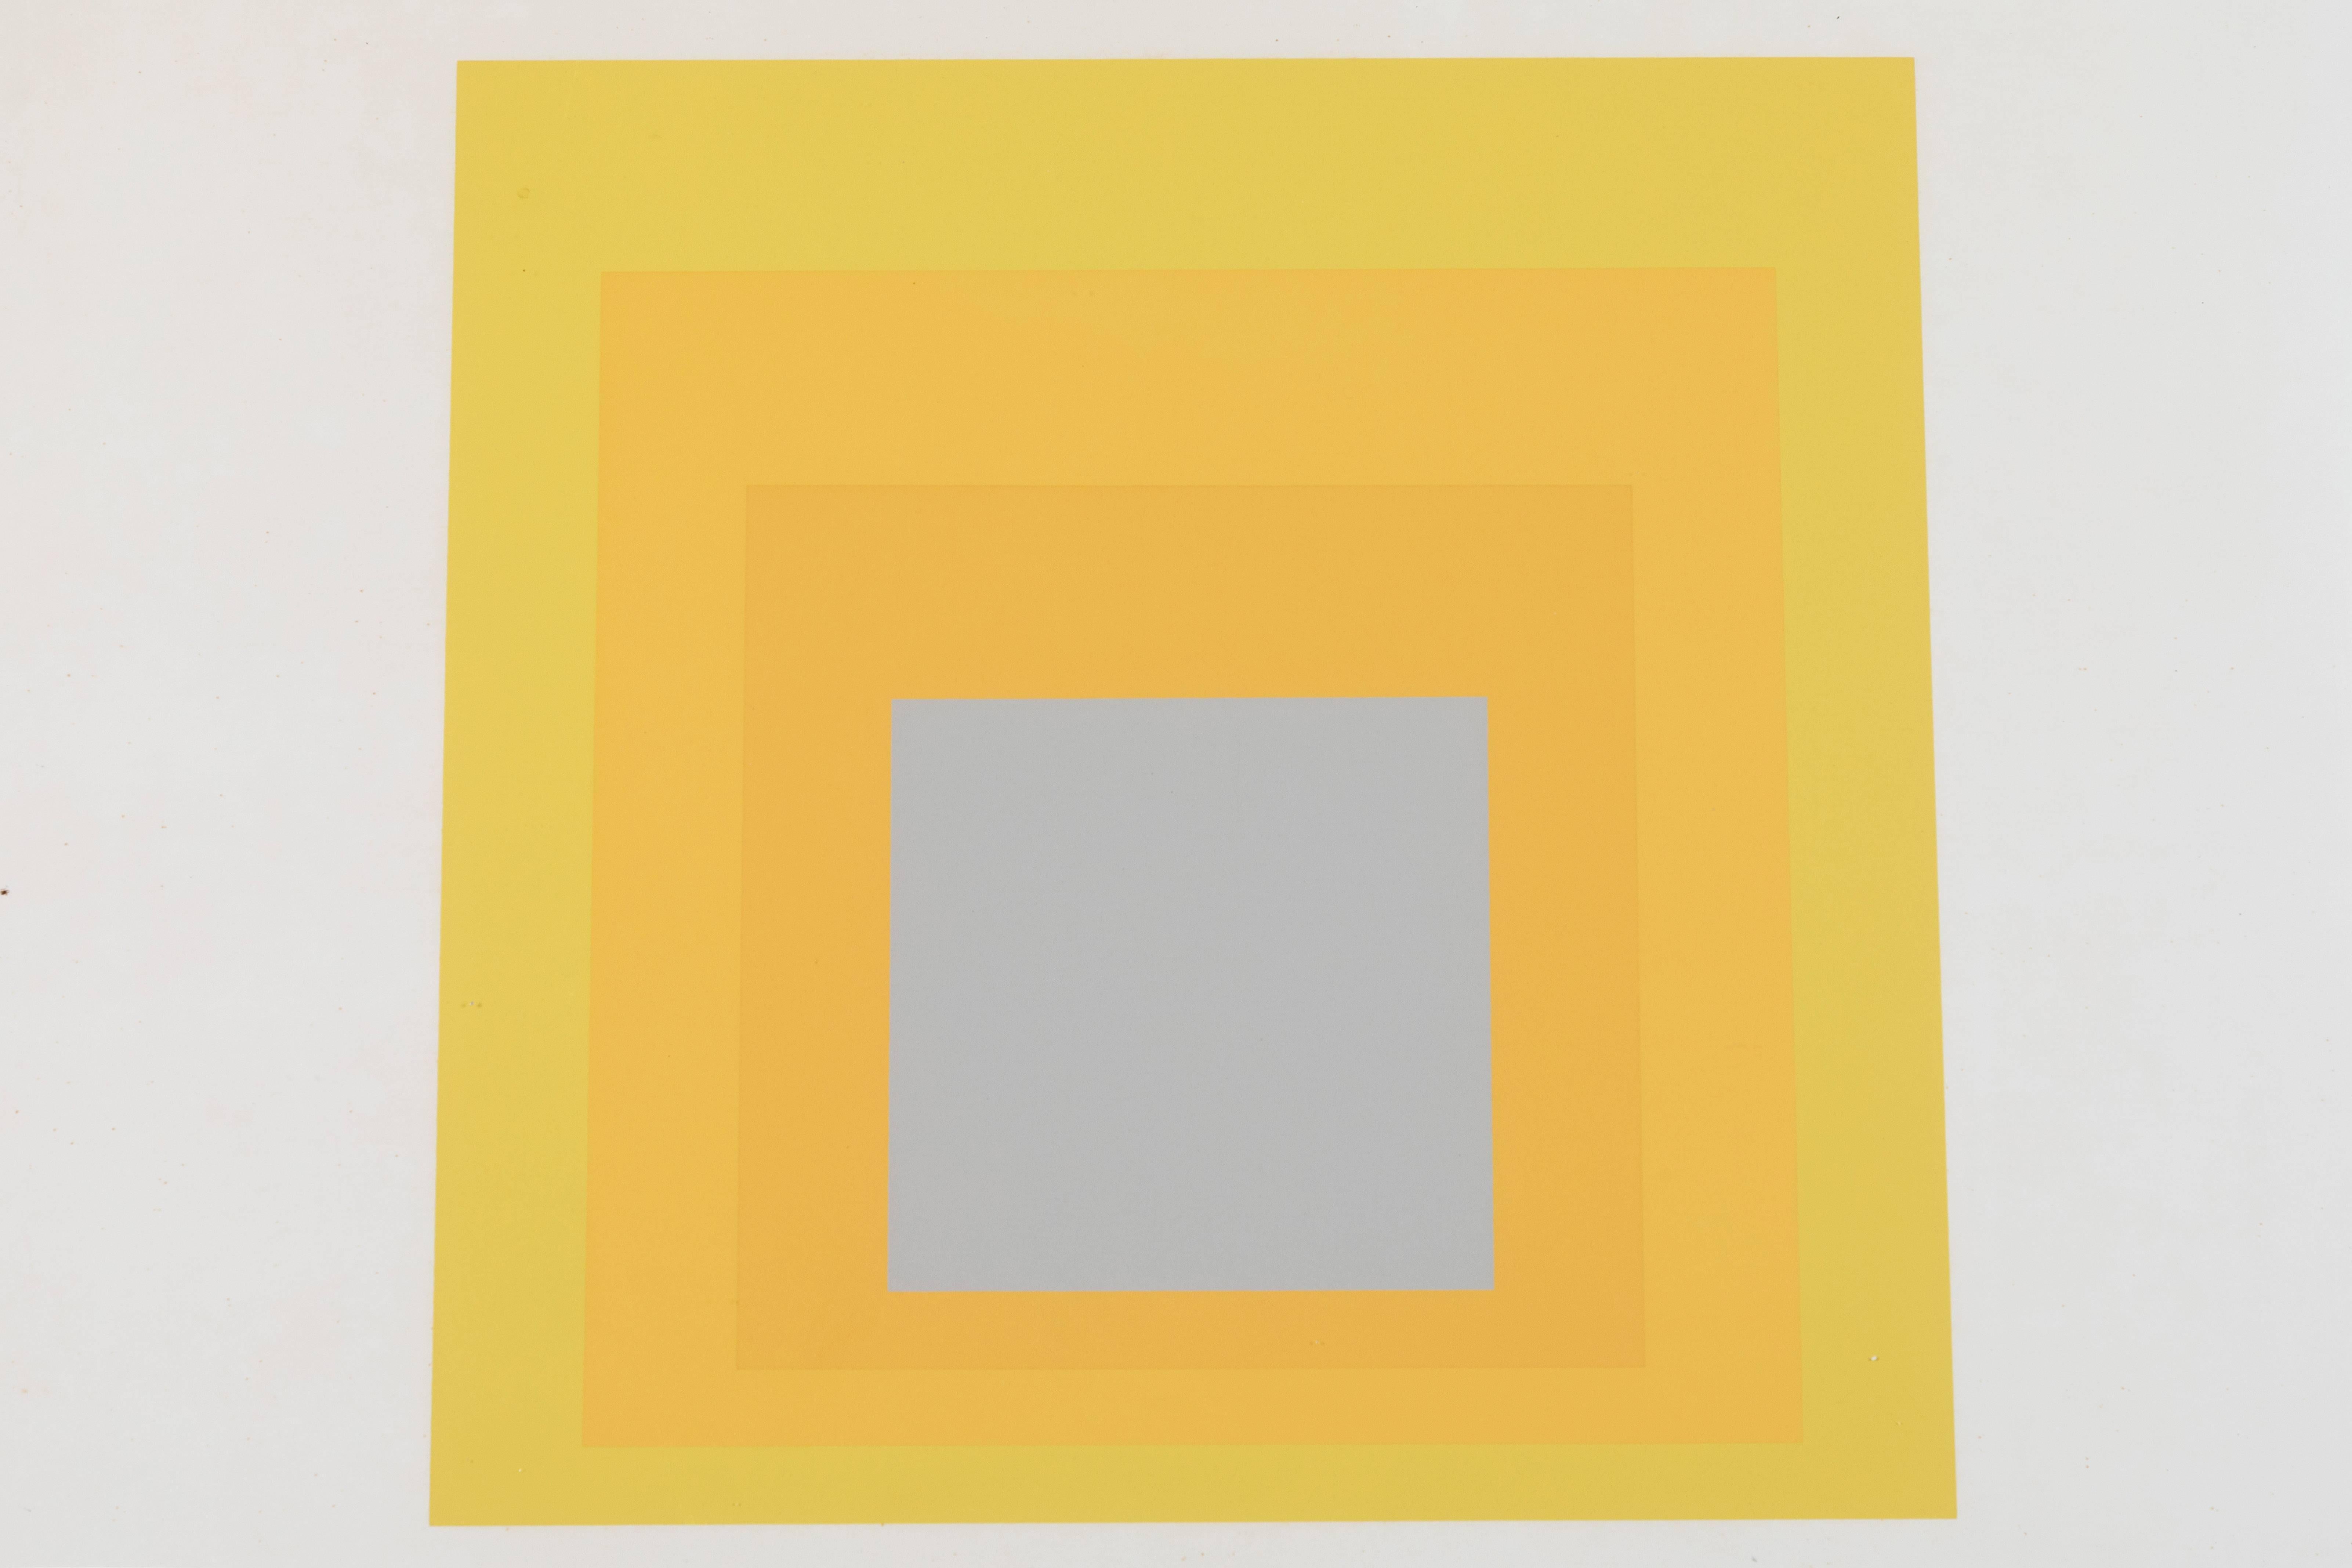 1 of 4 Folio prints from Formulation Articulation by Josef Albers.